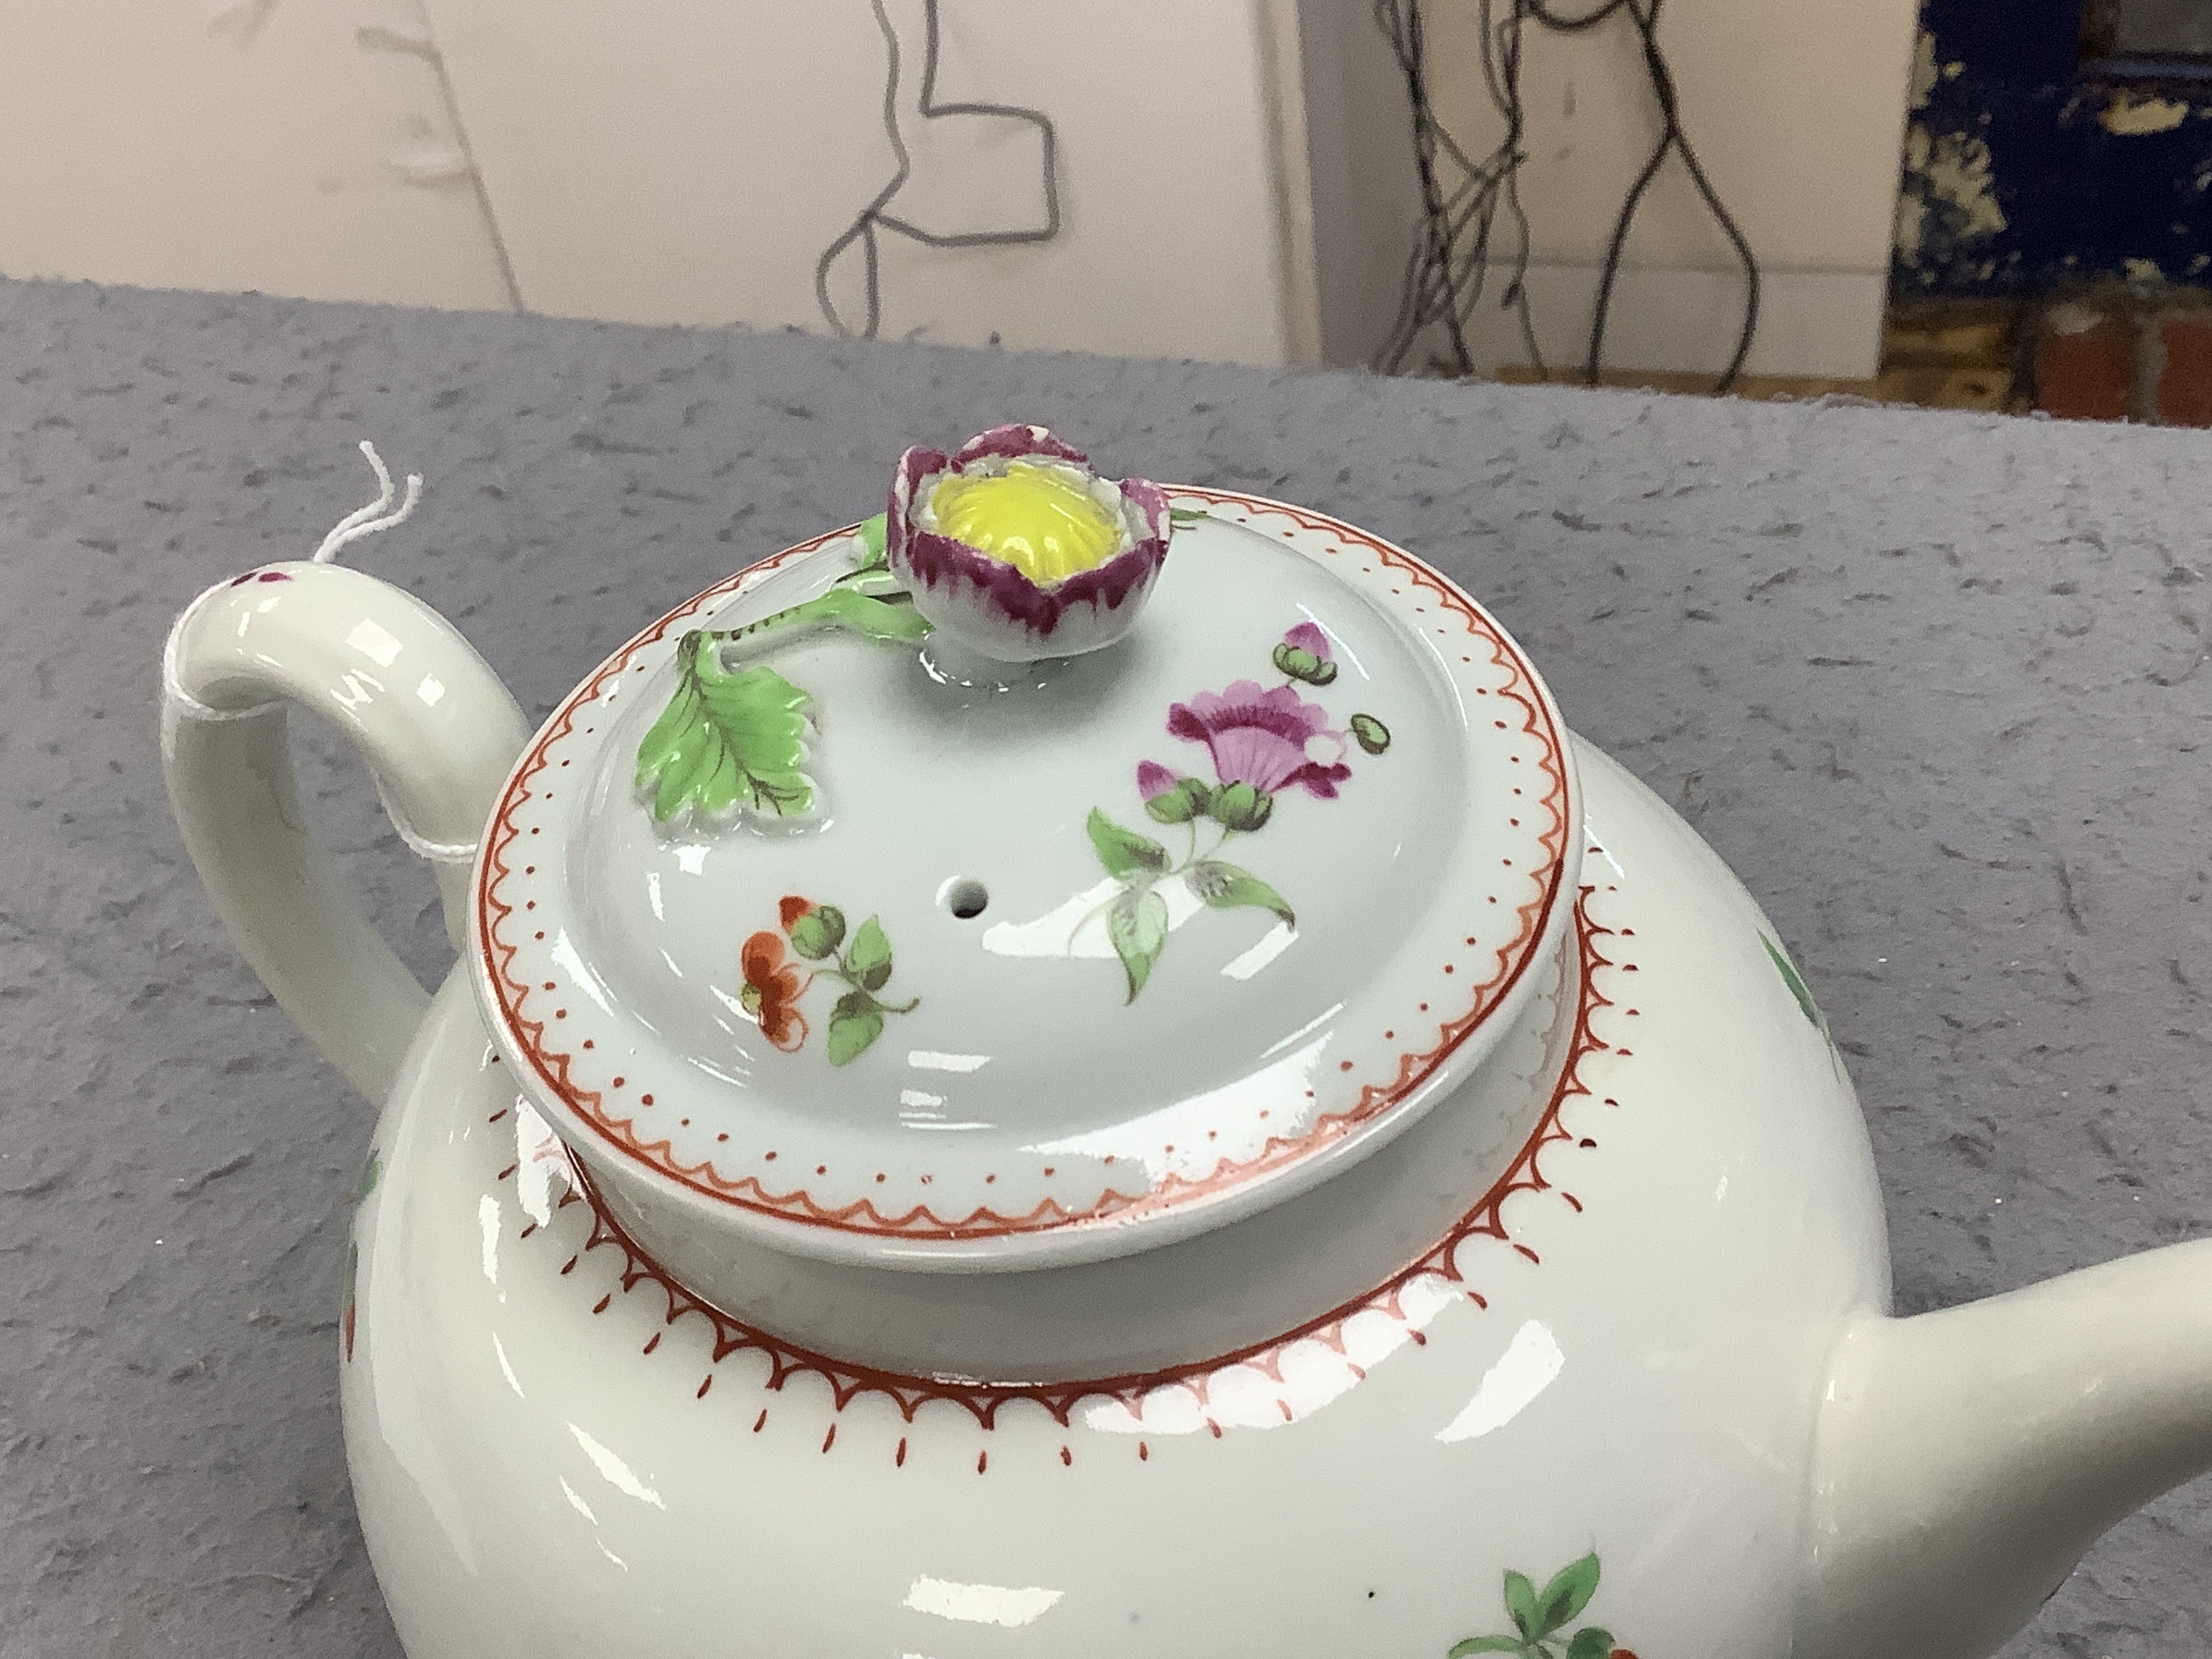 A Worcester globular teapot c. 1780, hand painted with flowers, 21cm wide